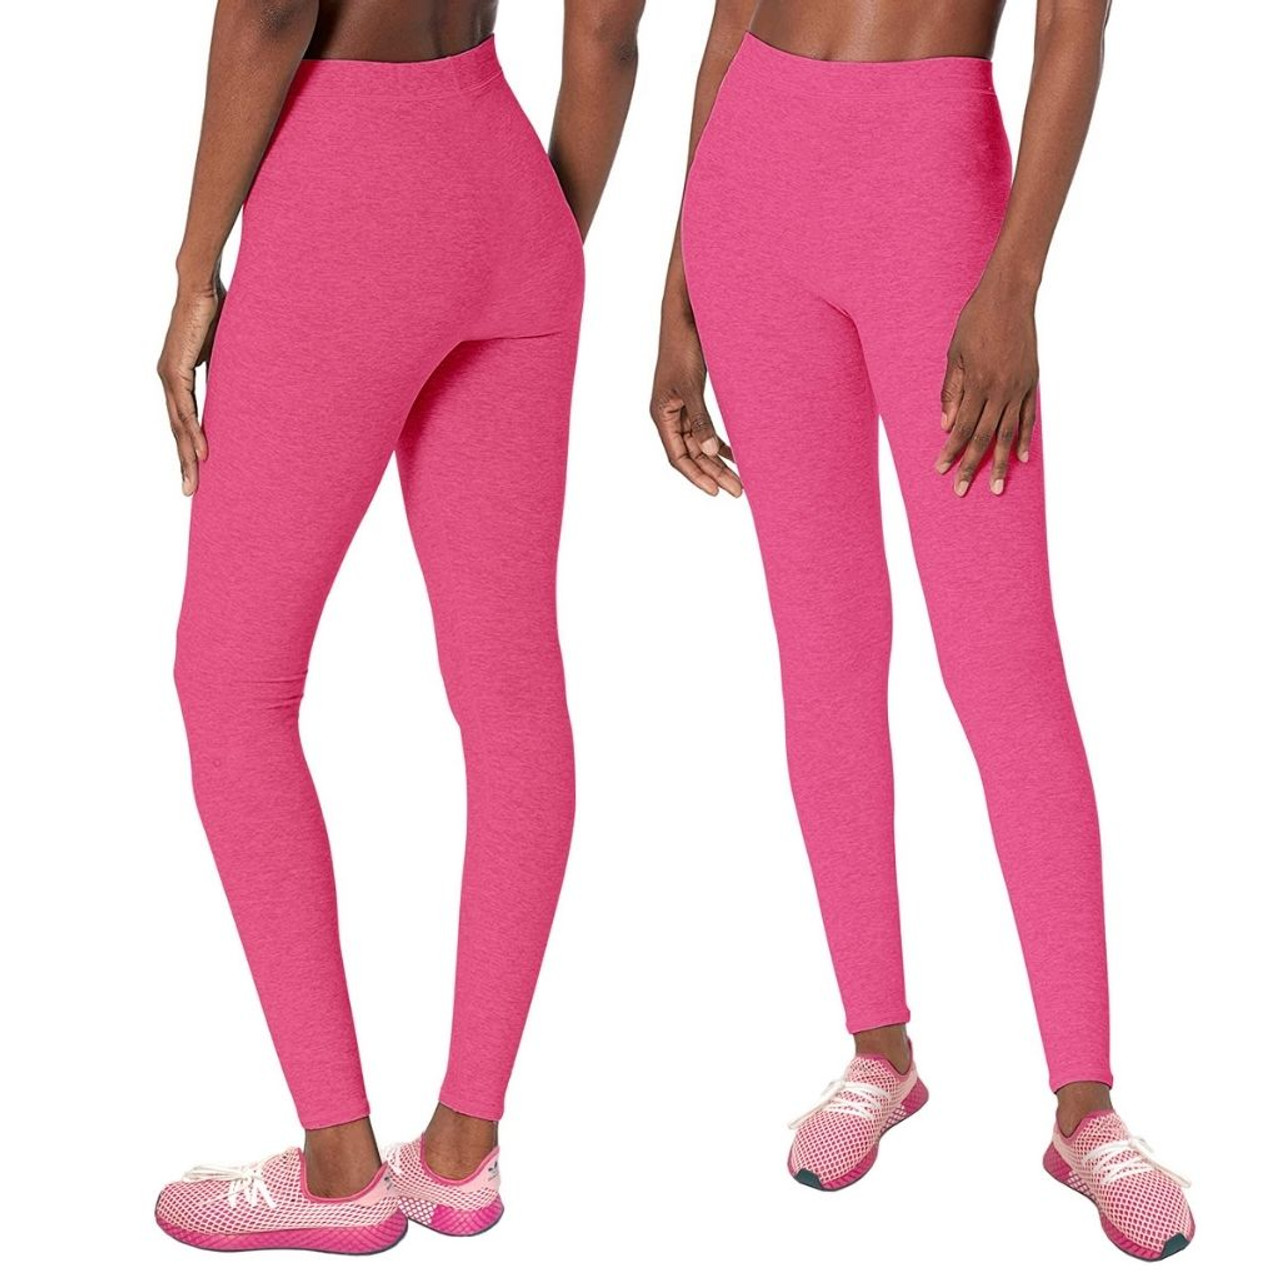 2-Pack: Women's Space Dye Marled High Waisted Fitness Sport Yoga